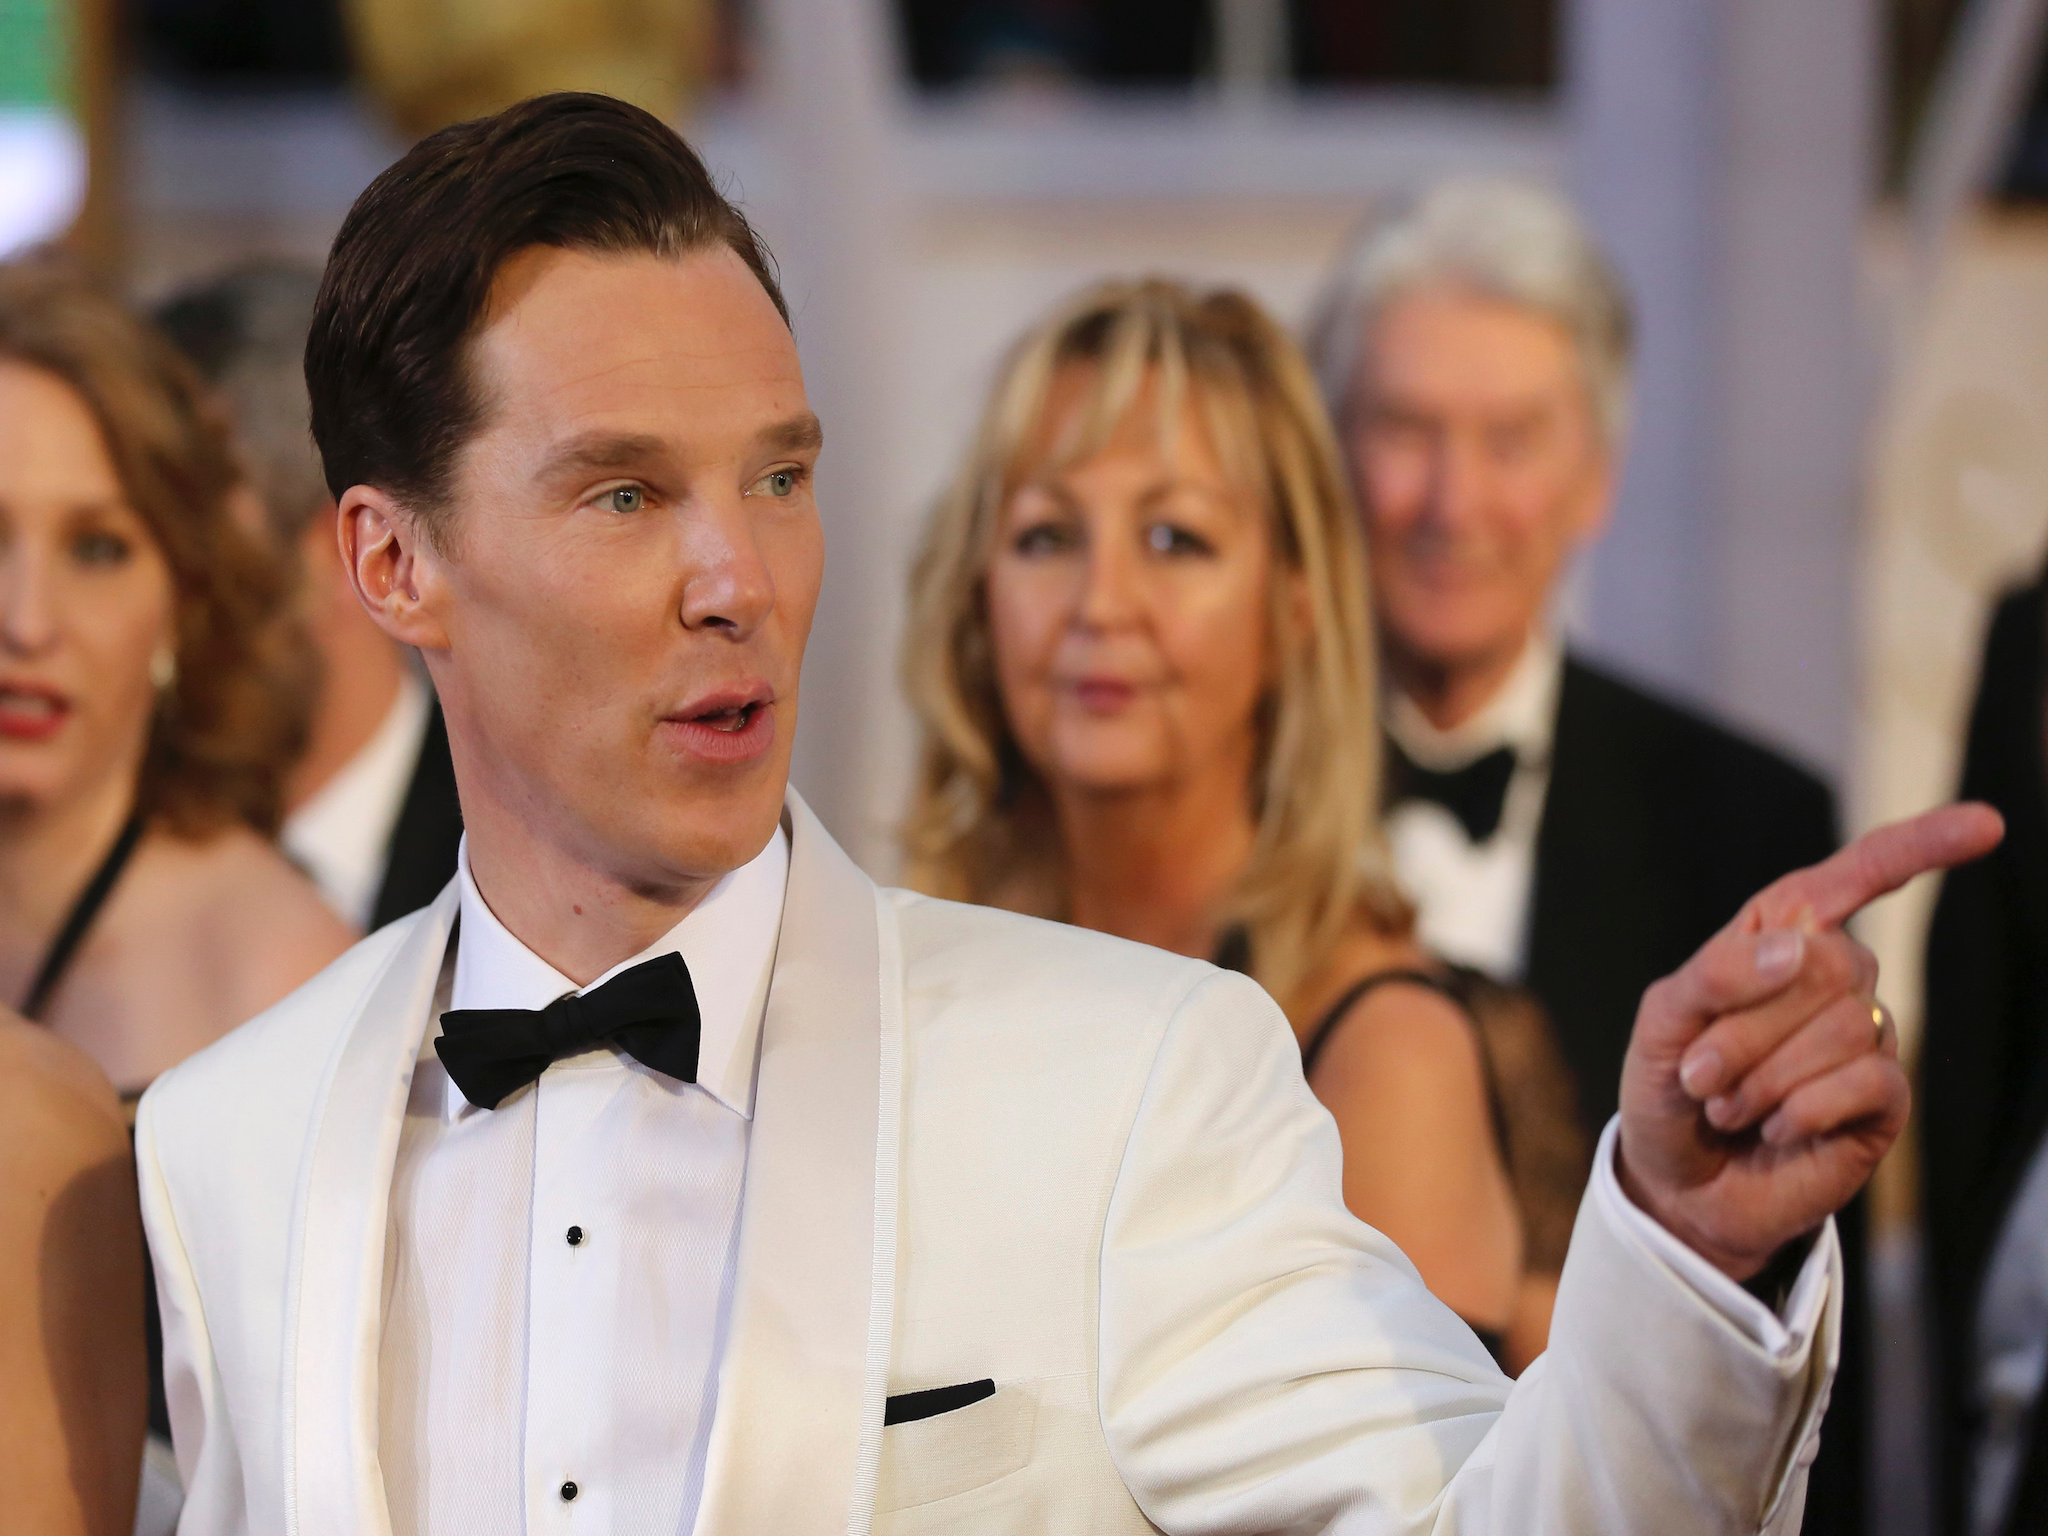 Benedict Cumberbatch was nominated for an Oscar for portraying Alan Turing in The Imitation Game’